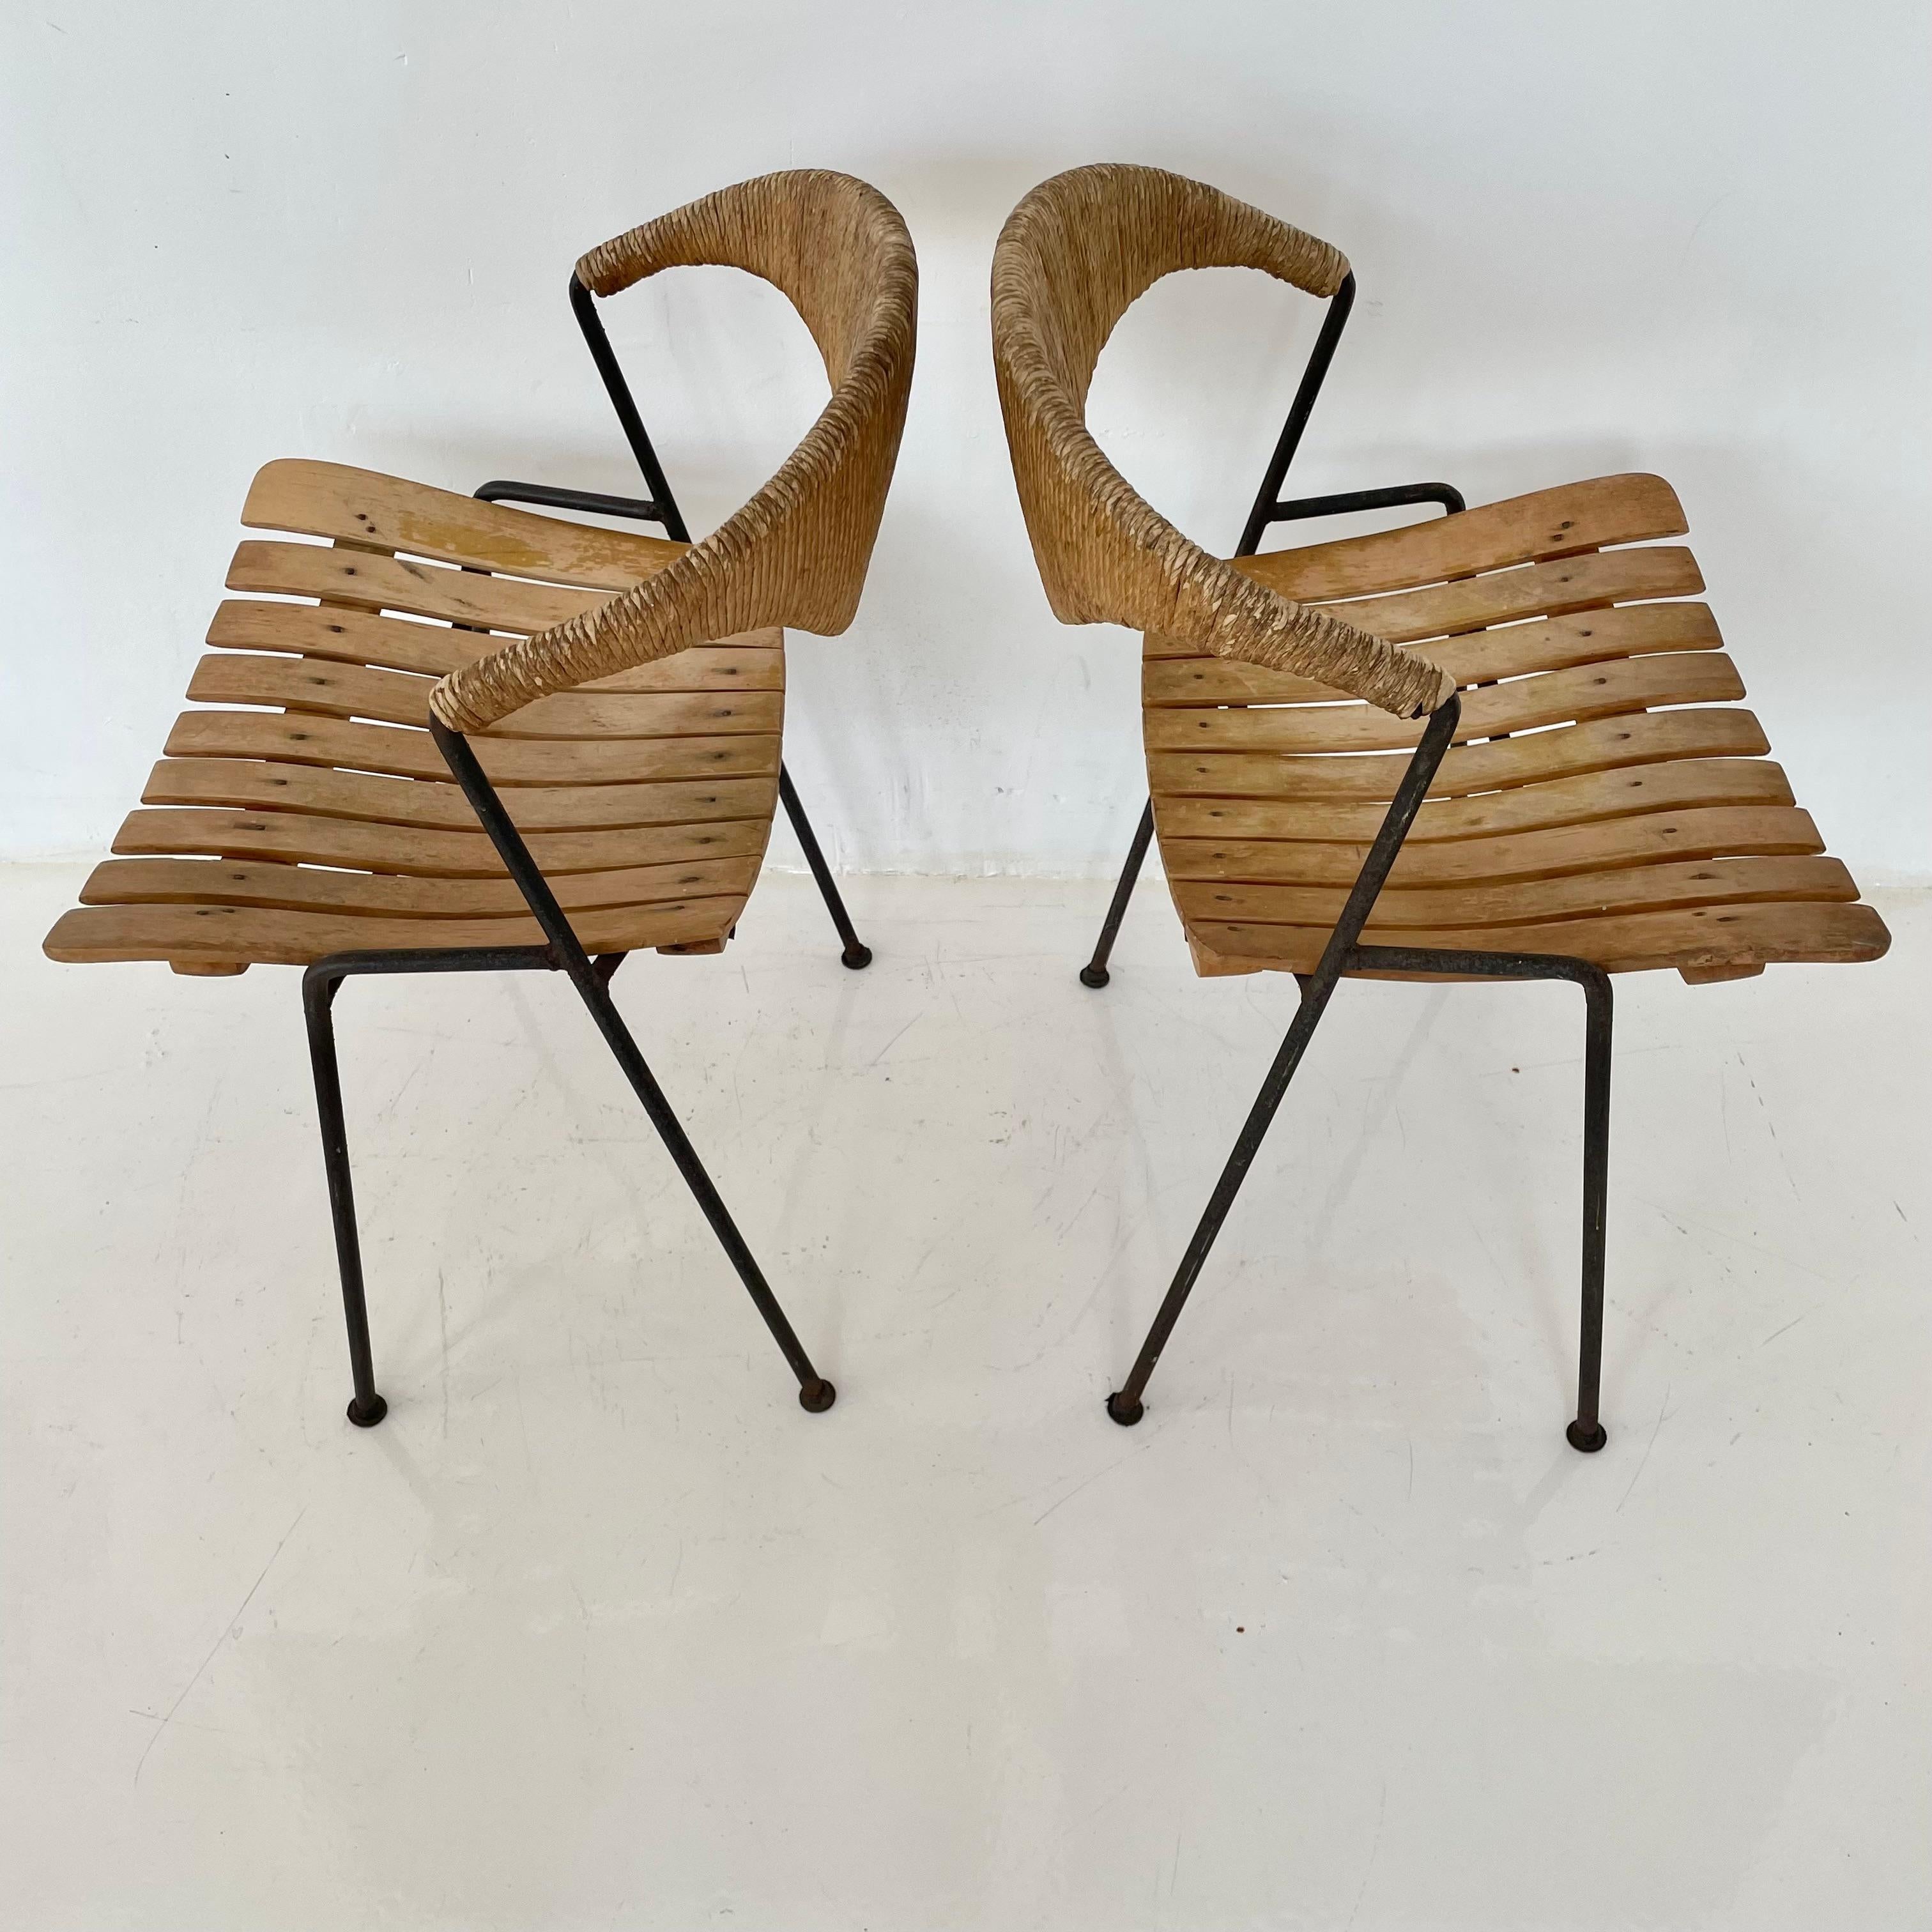 Early sculptural chairs by Arthur Umanoff. Chairs with signature rush back, slatted wood seat, and iron legs. Floating backrest. Look great from all angles. Good vintage condition. Two available. Priced individually.